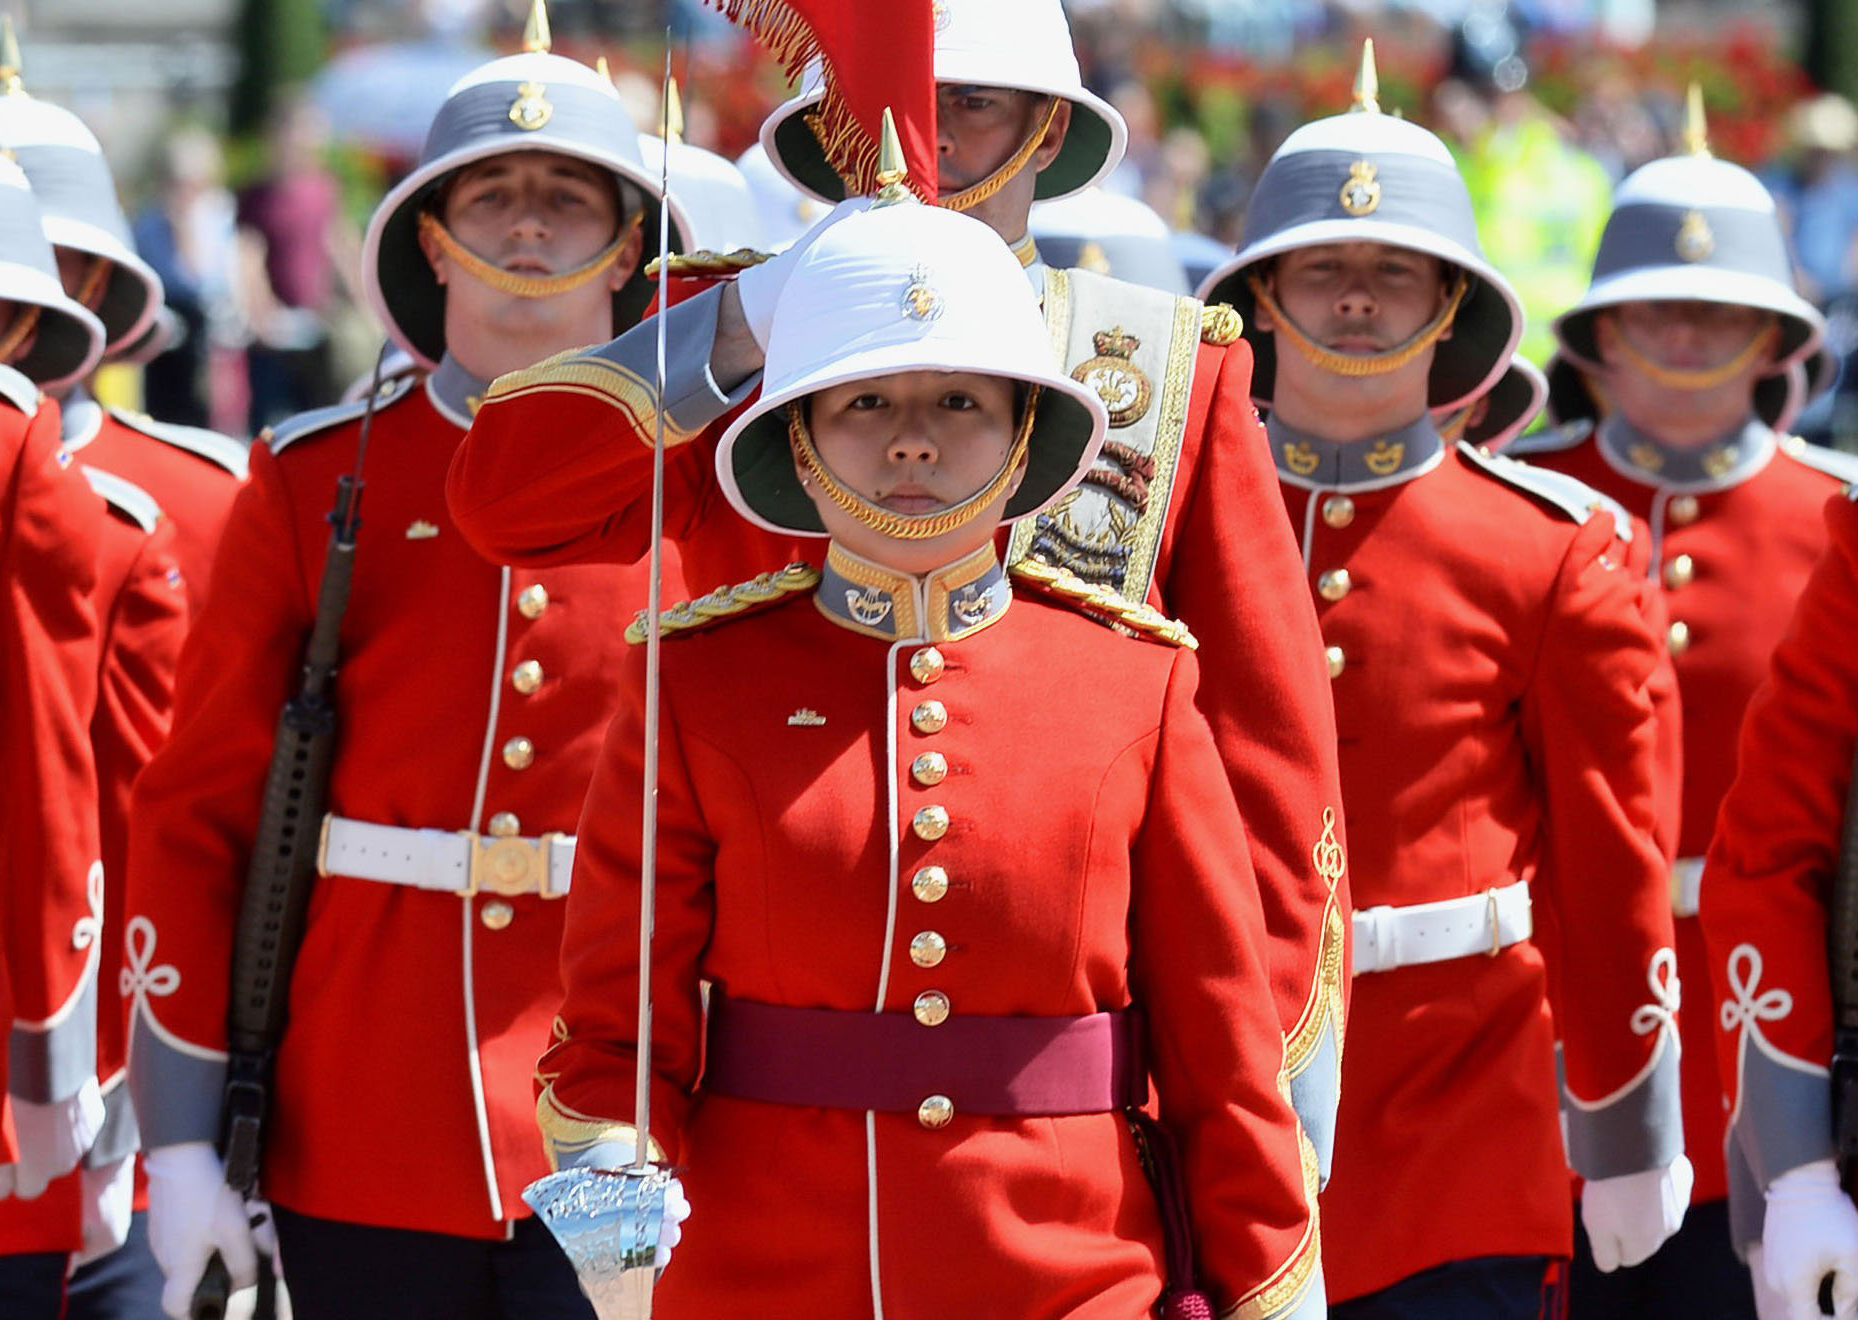 Captain Megan Couto (C) of the 2nd Battalion, Princess Patricia's Canadian Light Infantry (PPCLI) leads her battalion to makes history as the first woman to command the Queen's Guard at Buckingham Palace in central London on June 26, 2017.  / AFP PHOTO / POOL / John StillwellJOHN STILLWELL/AFP/Getty Images